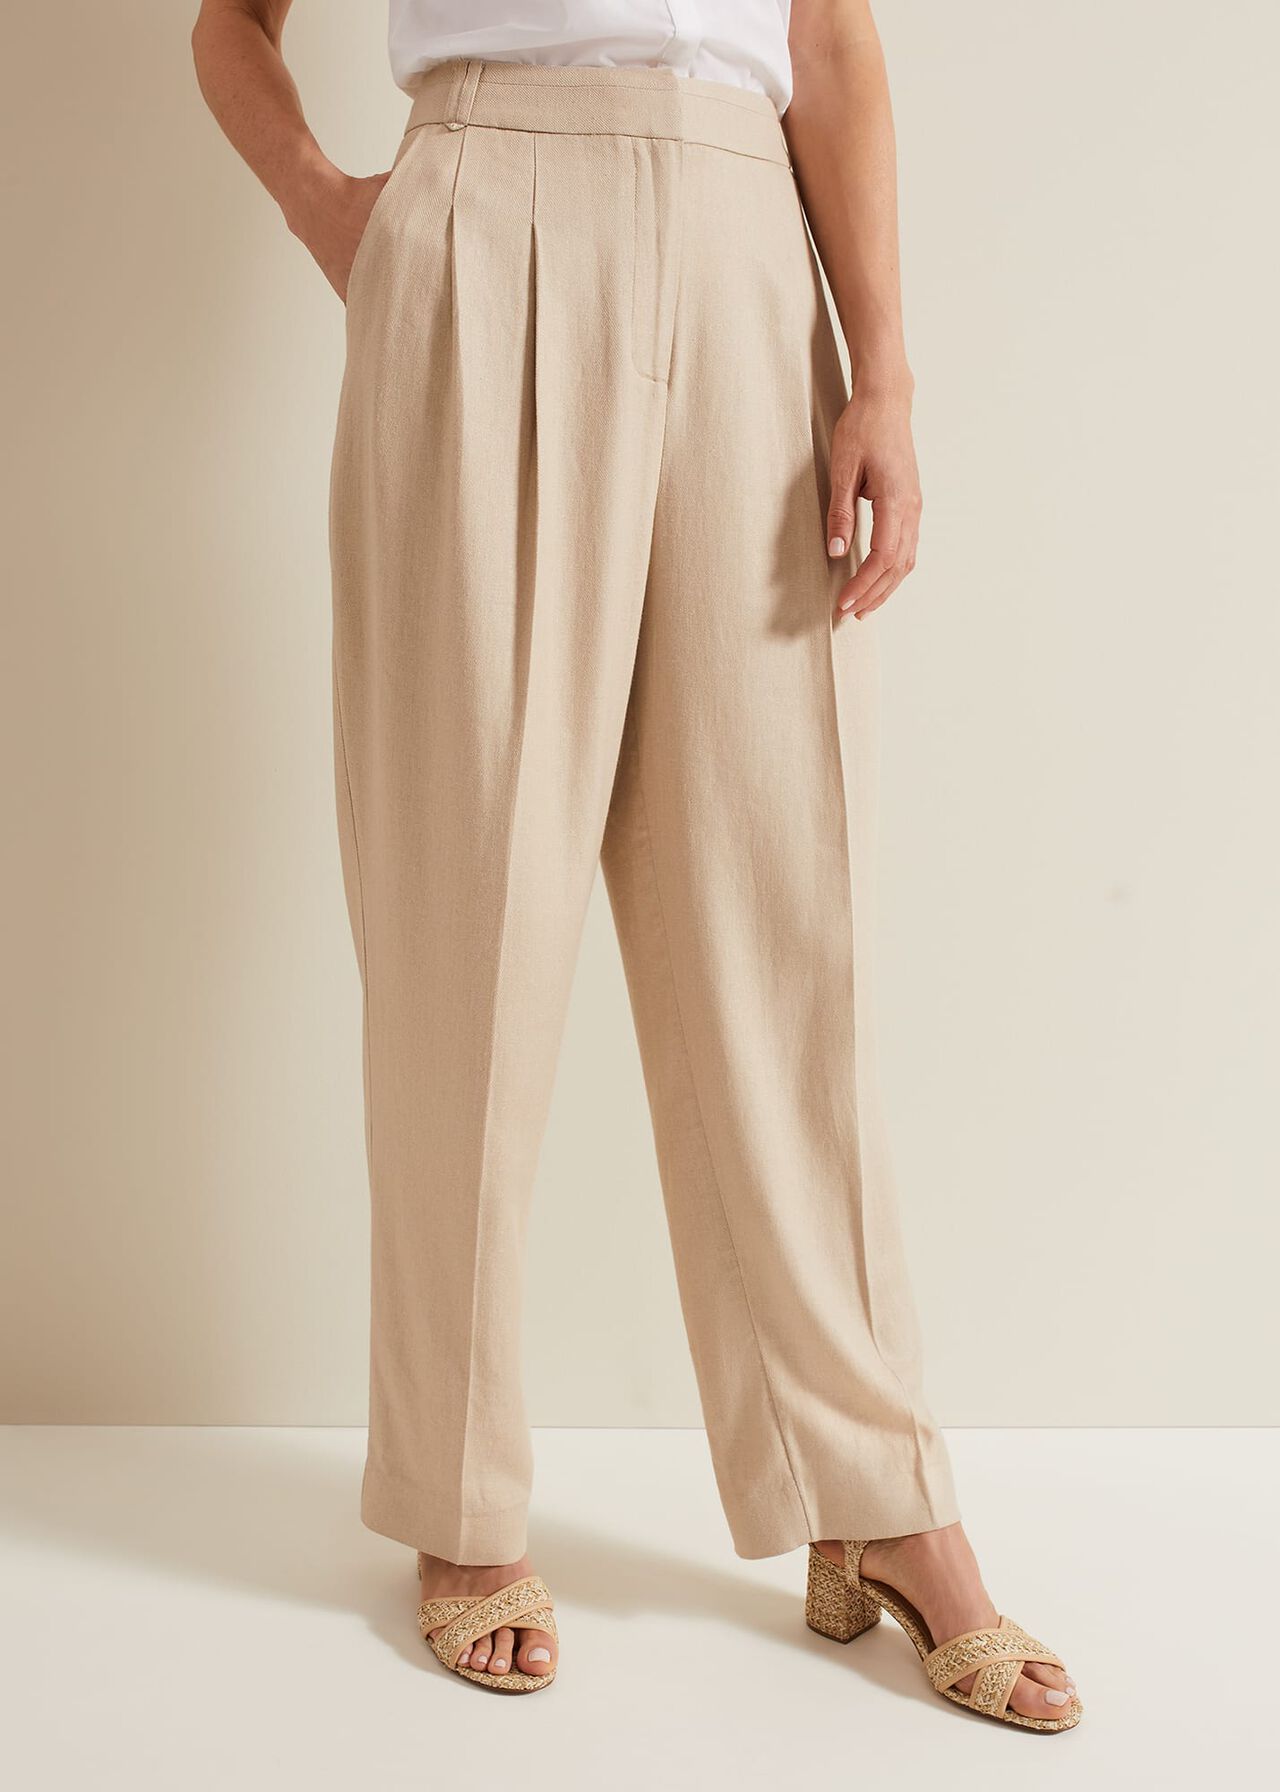 Addison Pleat Front Trousers